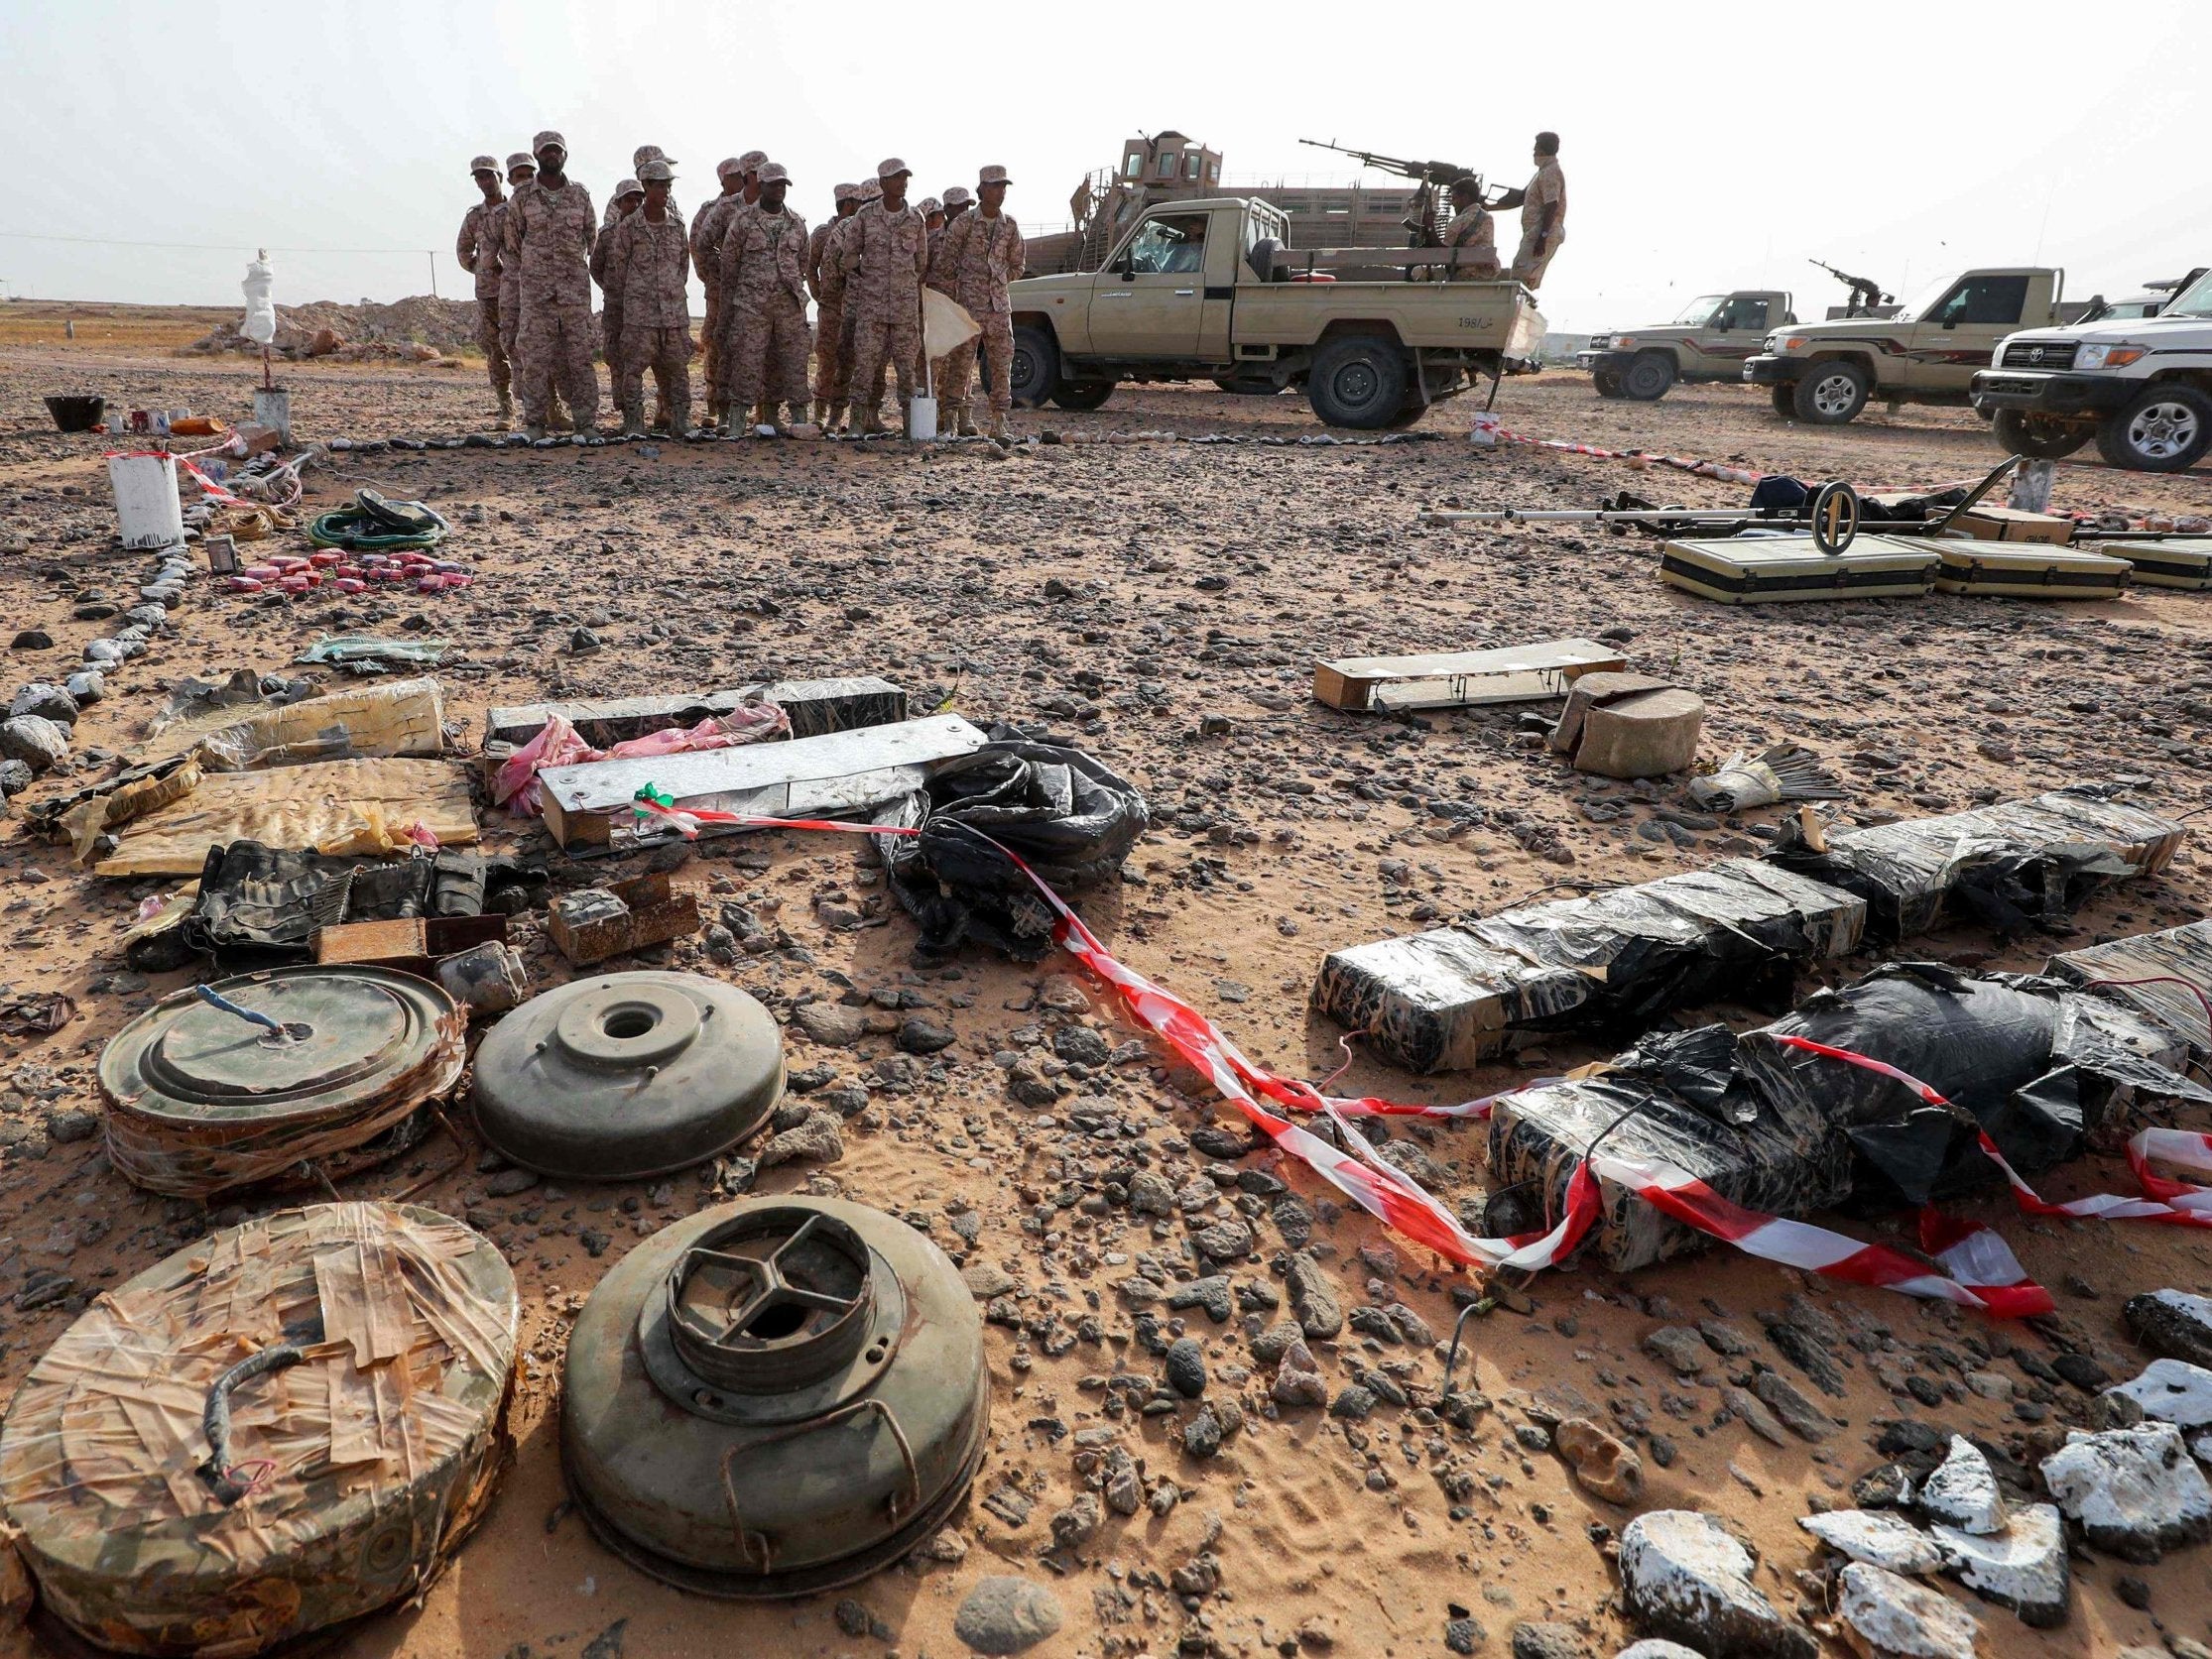 Yemeni soldiers loyal to the Saudi and UAE-backed government attending a mine clearance and dismantling training at a centre funded by the UAE armed forces in Mukalla